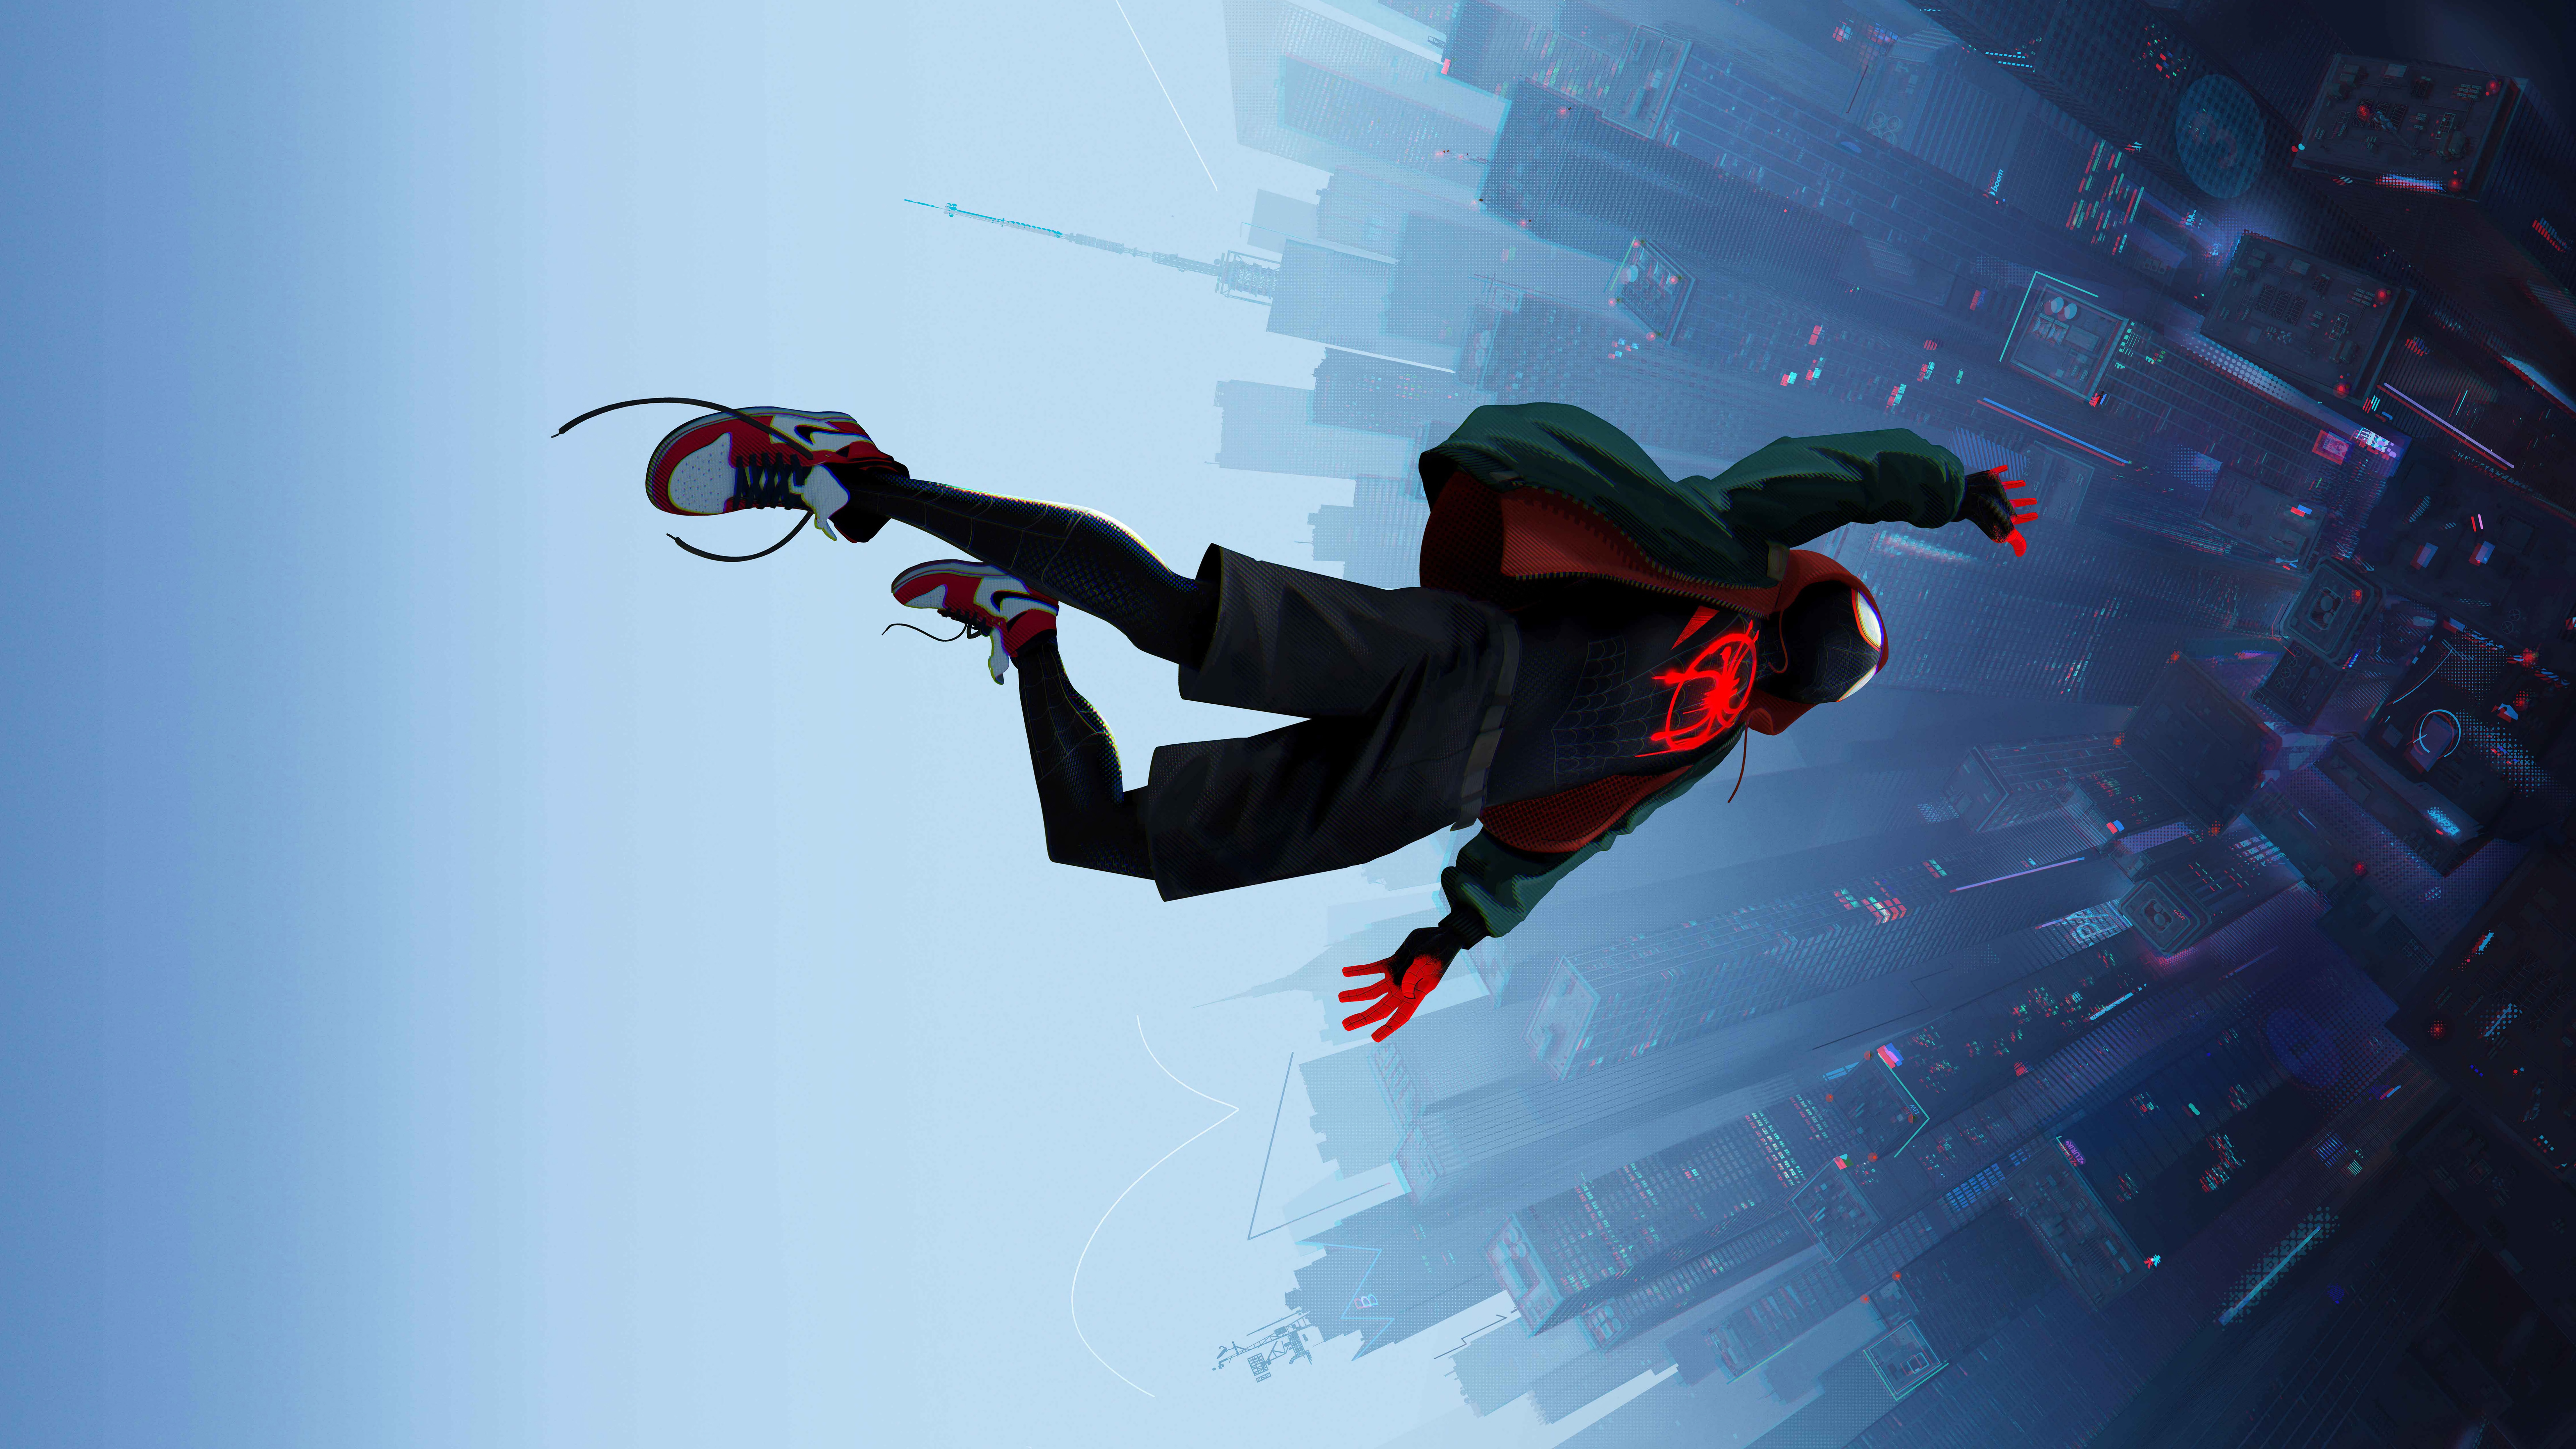 430+ Spider-Man: Into The Spider-Verse HD Wallpapers and Backgrounds